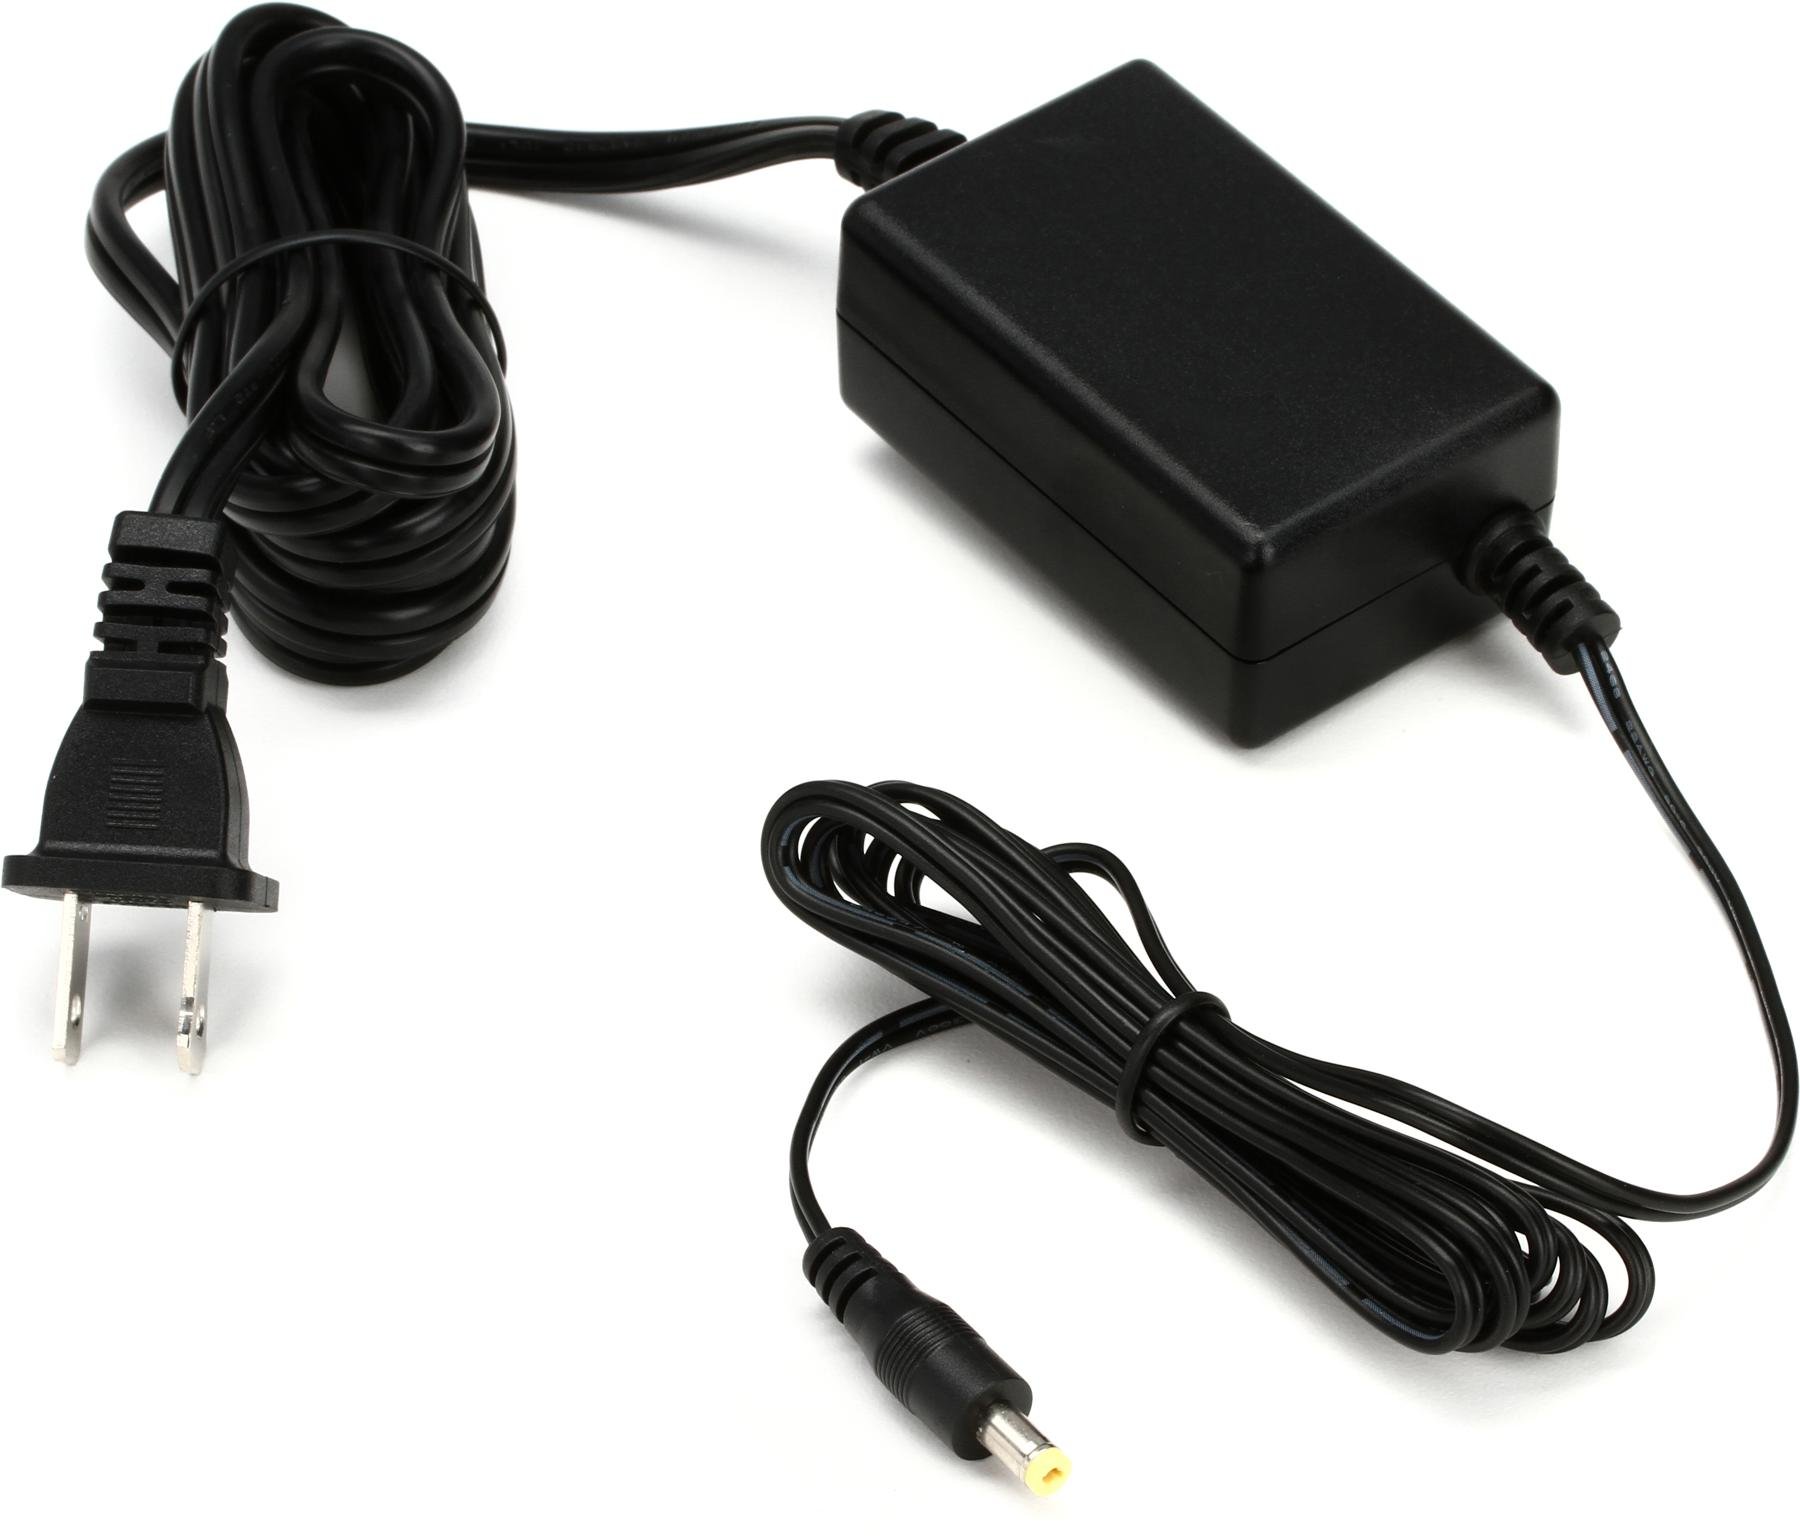 MyVolts 9V Power Supply Adaptor Compatible with Korg Volca FM Synth US Plug